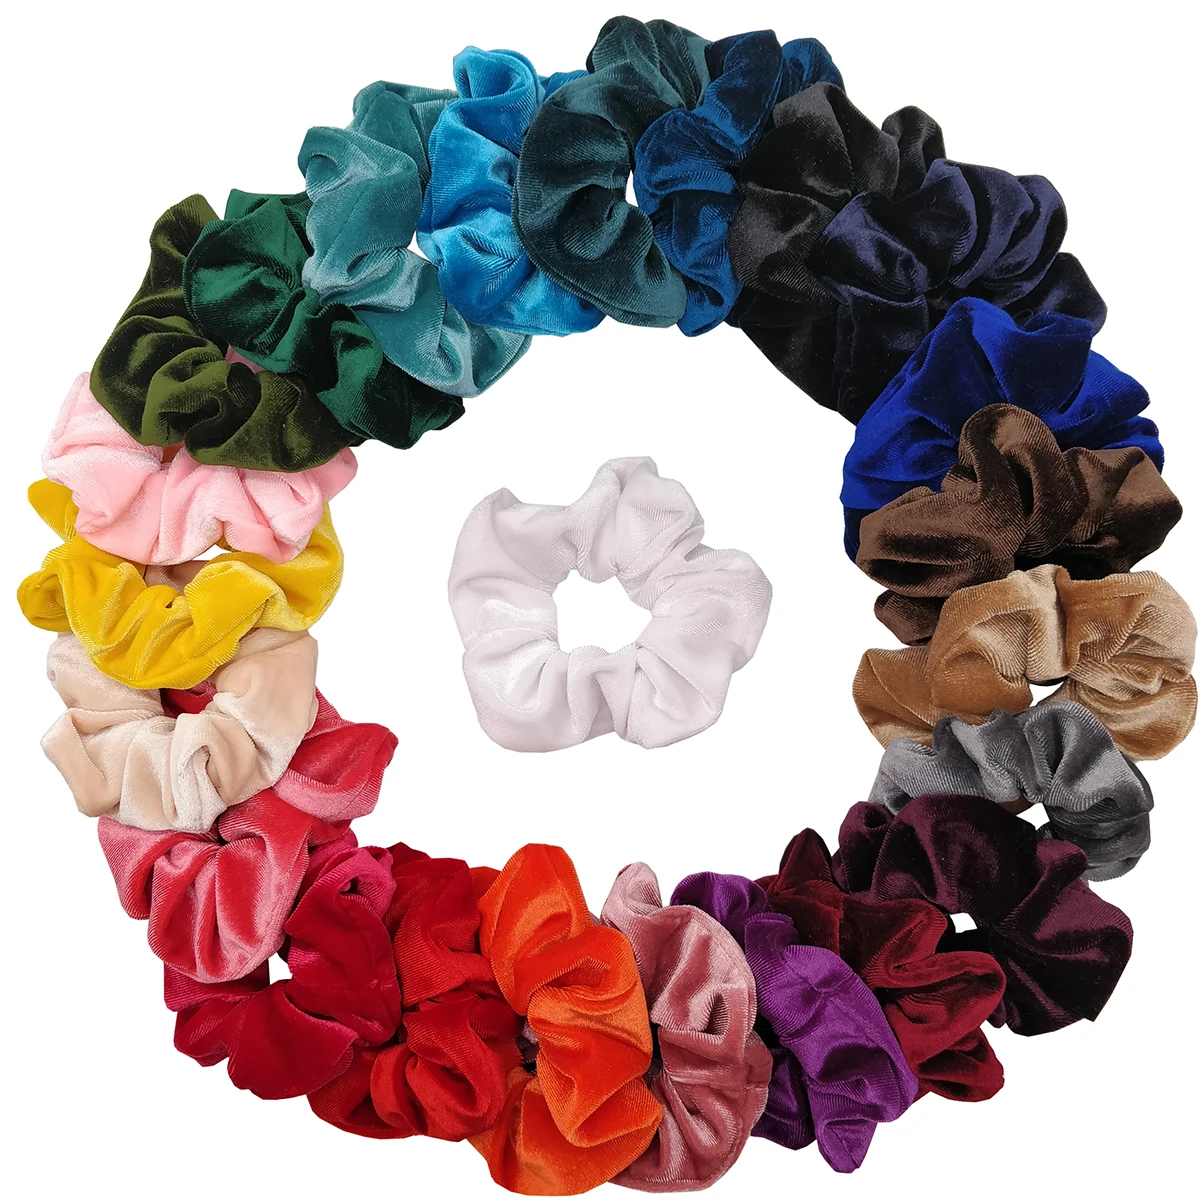 50/40/30pc Winter Soft Hair Scrunchies for Women Girl Plush Elastic Tie Rubber Band Christmas Santa Accessories Fluffy Fake Fur ins new baby cotton bib waterproof embroidery heart white color saliva towel scarf baby fashion fake collar bib accessories